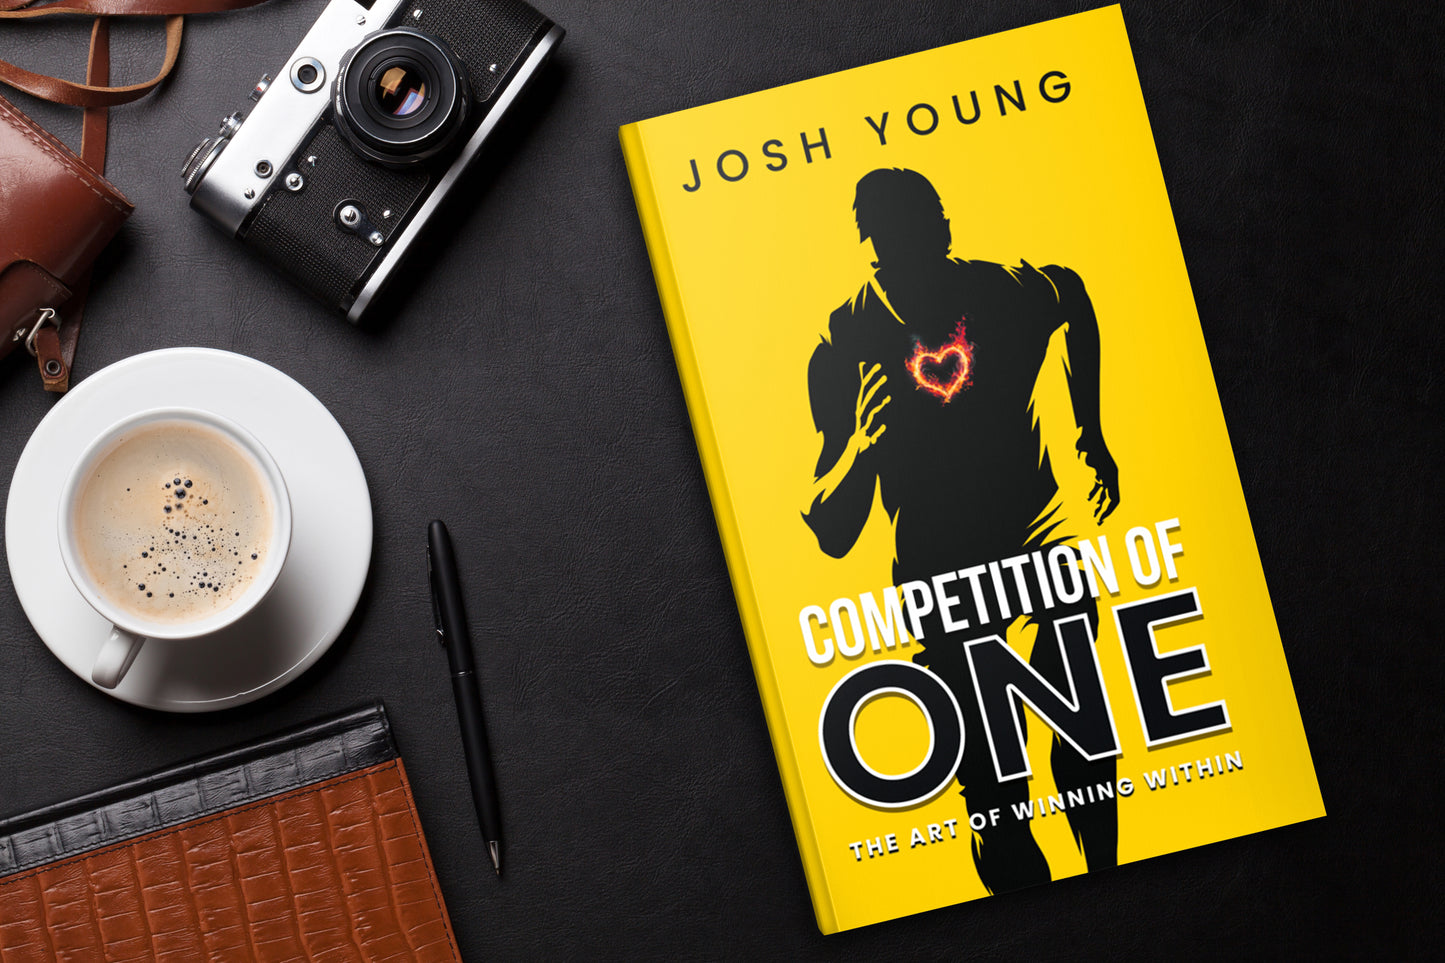 Competition of One | The Art of Winning Within